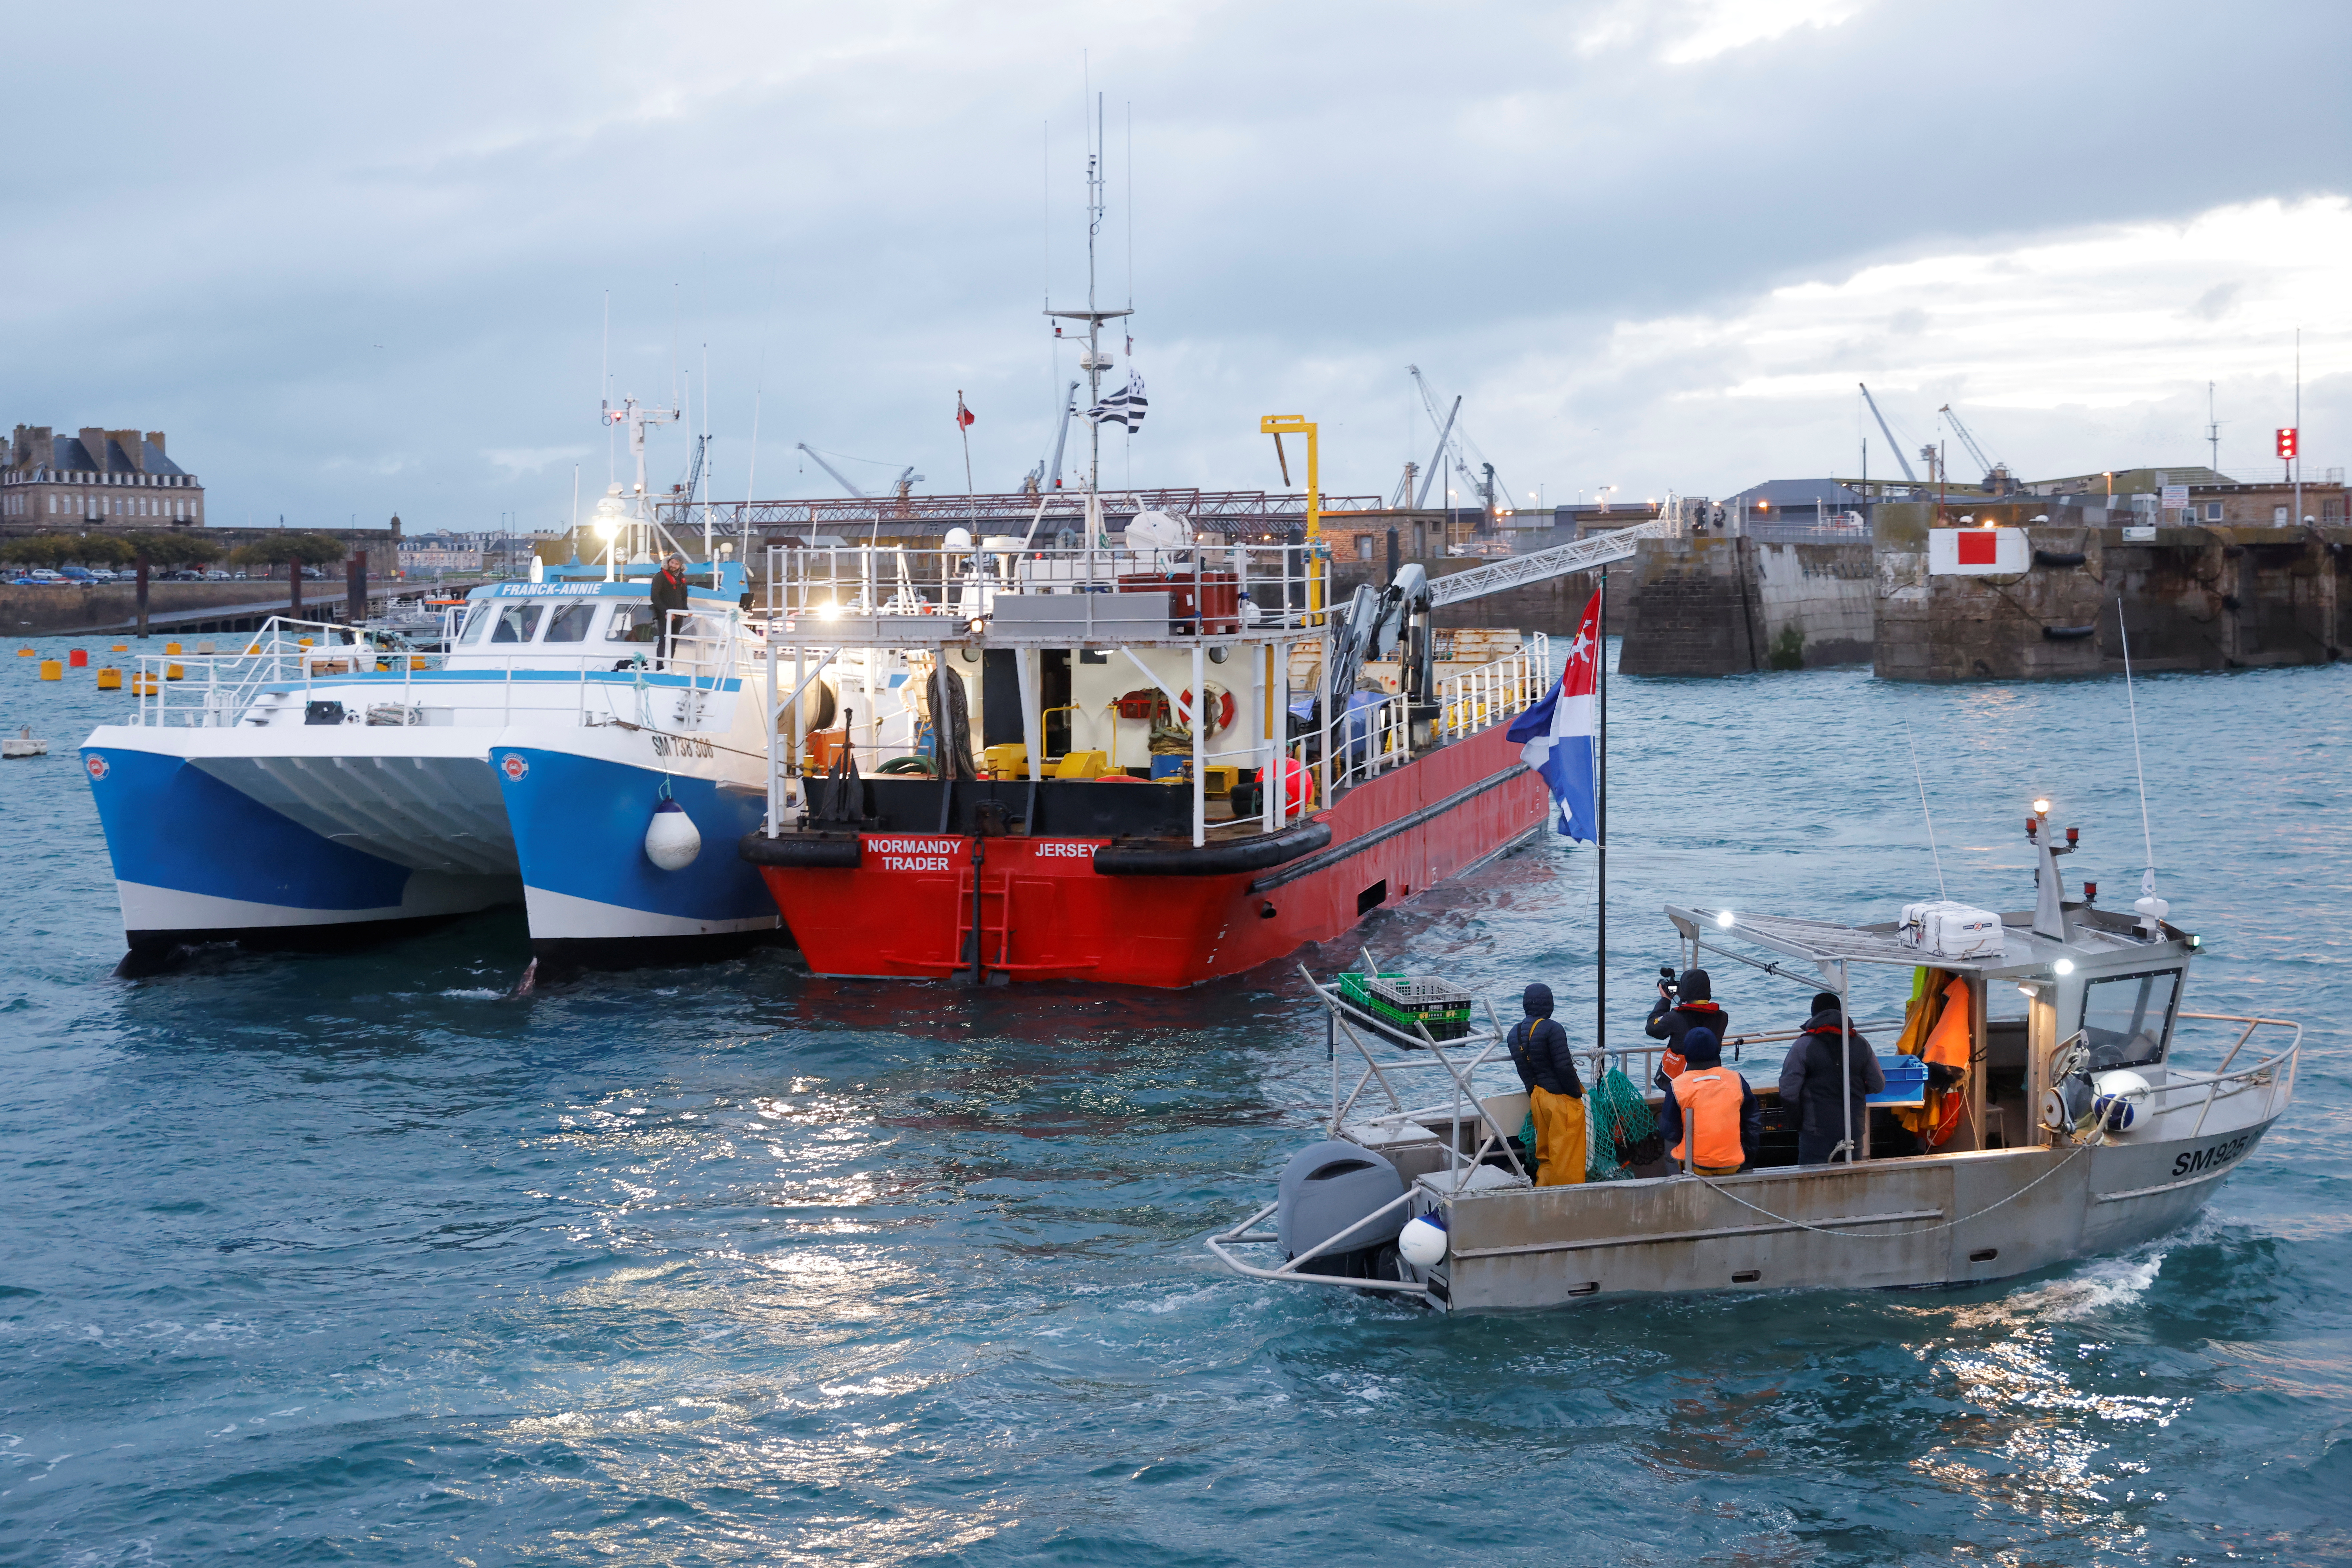 French fishermen block the 'Normandy Trader' boat at the entrance of the port of Saint-Malo as they started a day of protests to mark their anger over the issue of post-Brexit fishing licenses, in Saint-Malo, France, November 26, 2021. REUTERS/Stephane Mahe